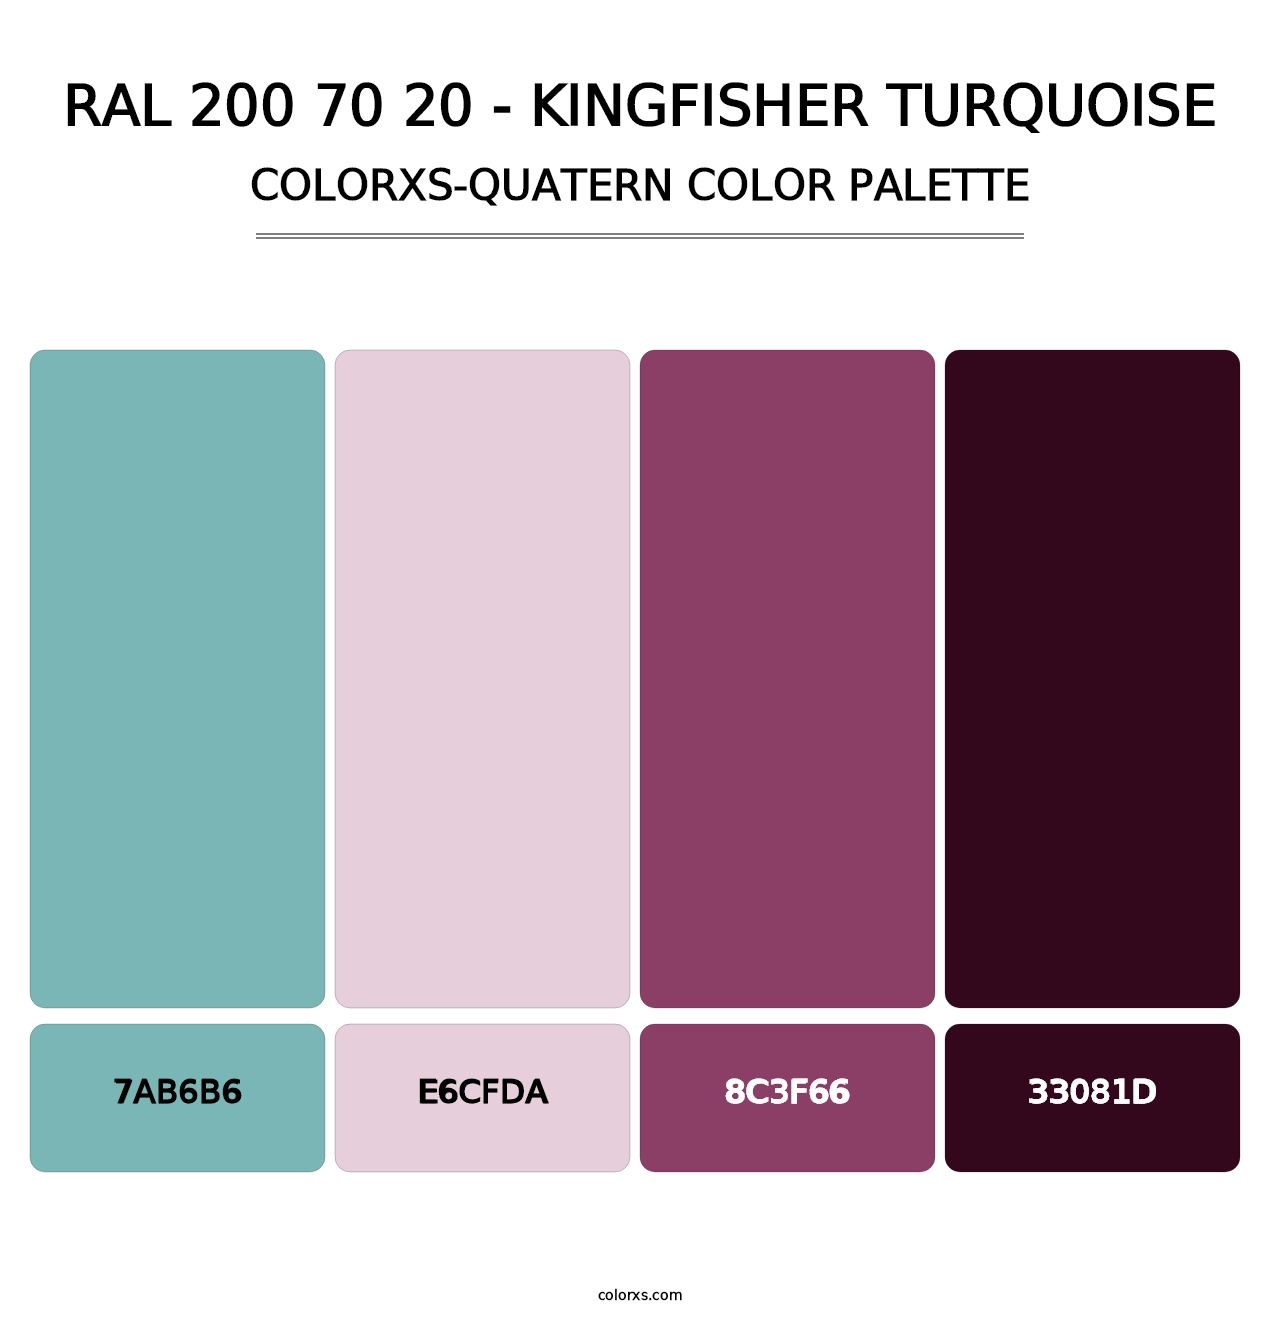 RAL 200 70 20 - Kingfisher Turquoise - Colorxs Quatern Palette